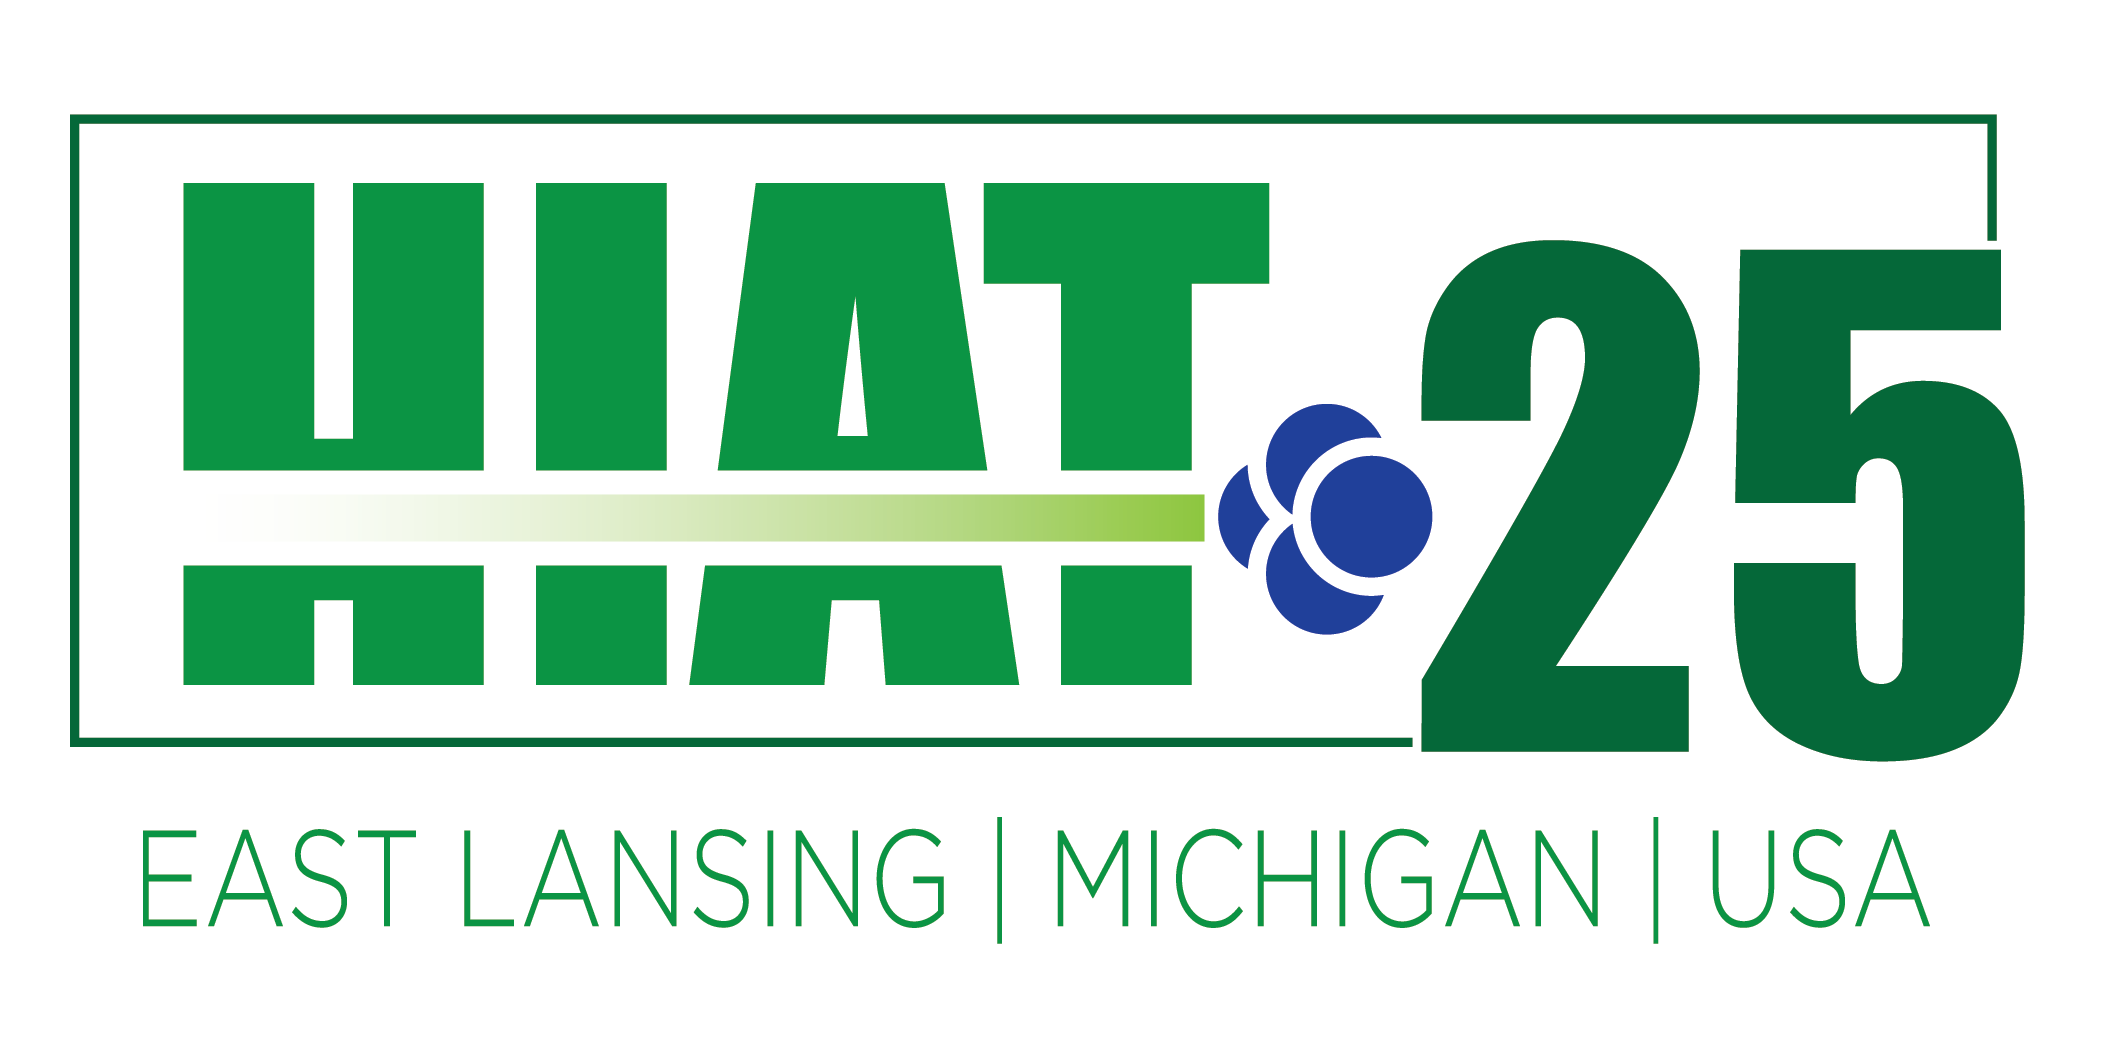 HIAT 2025 logo with image of Facility for Rare Isotope Beams